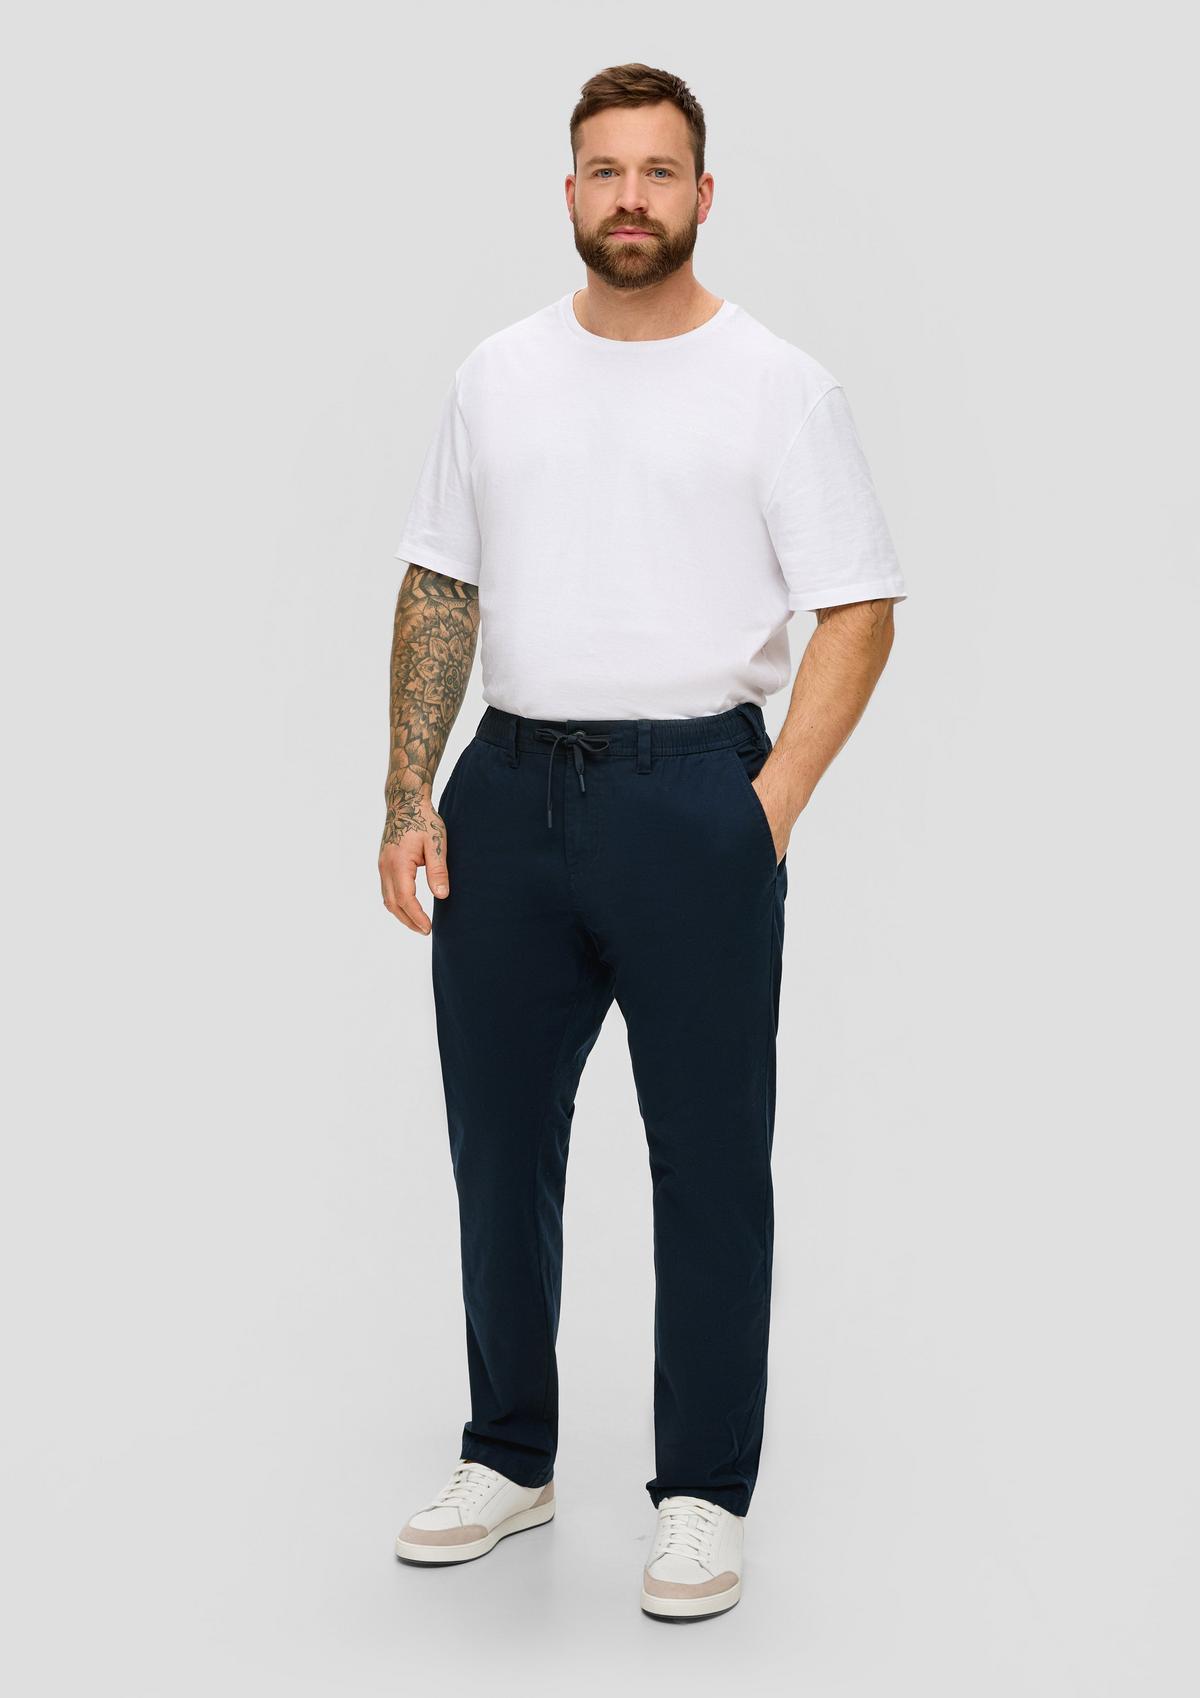 Relaxed fit: Trousers with drawstring waistband